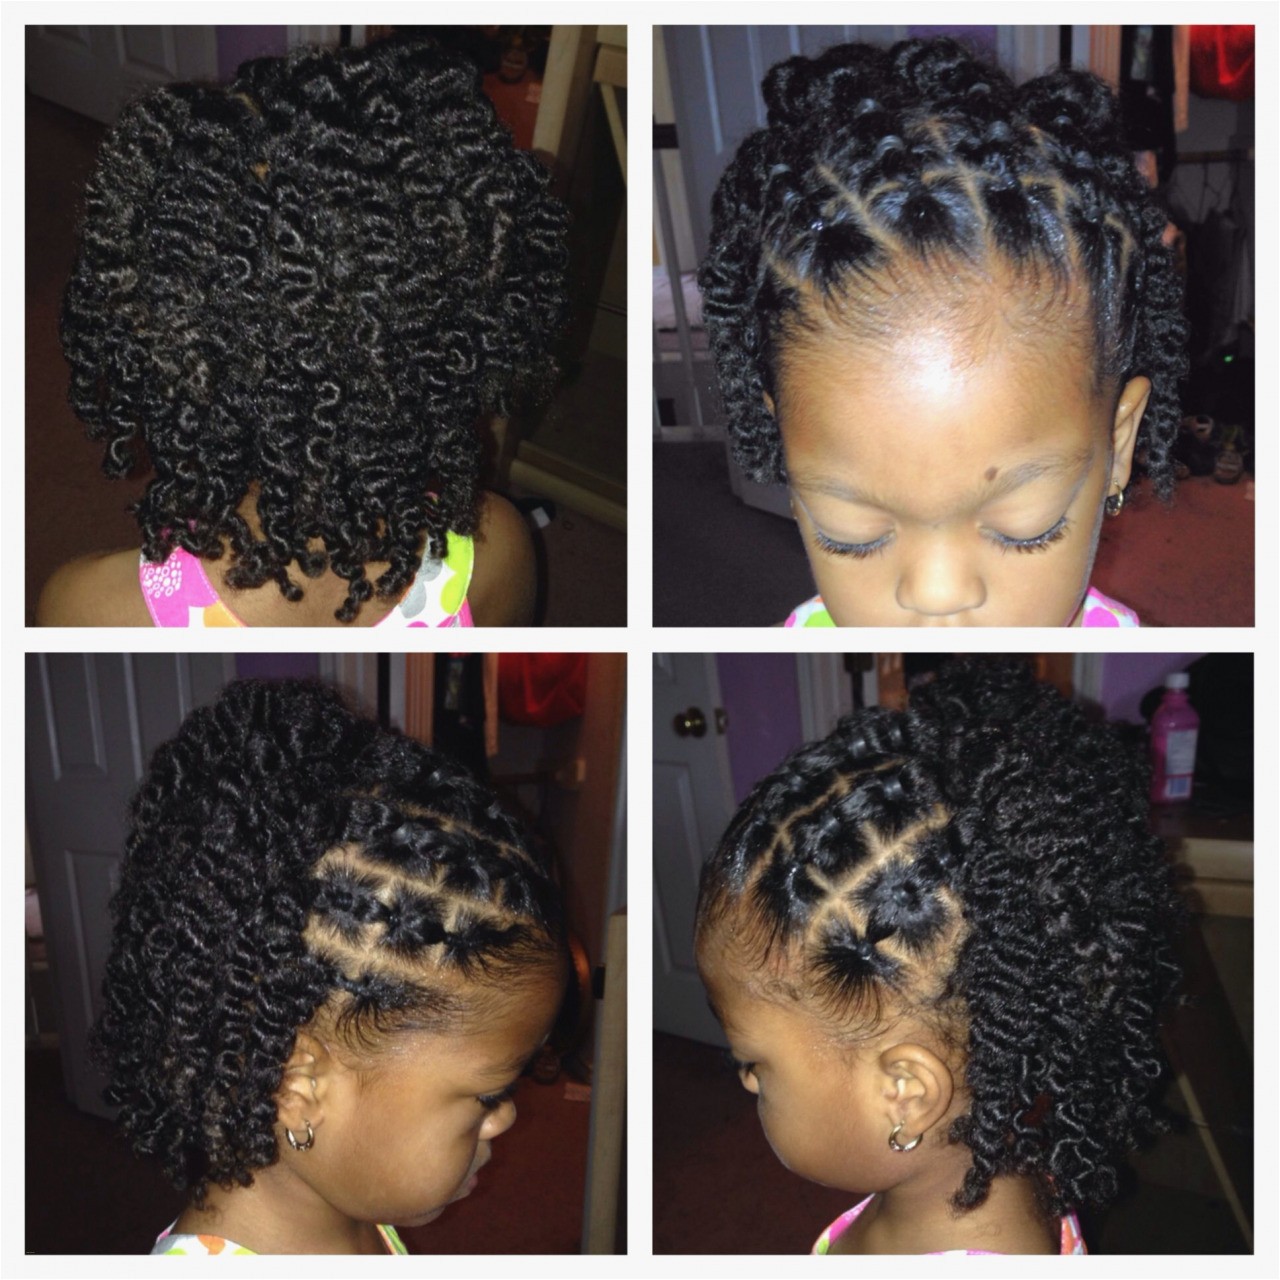 77 Hairstyles for Black Little Girls Unique Natural Hair Styles for Black Kids Fresh I Pinimg